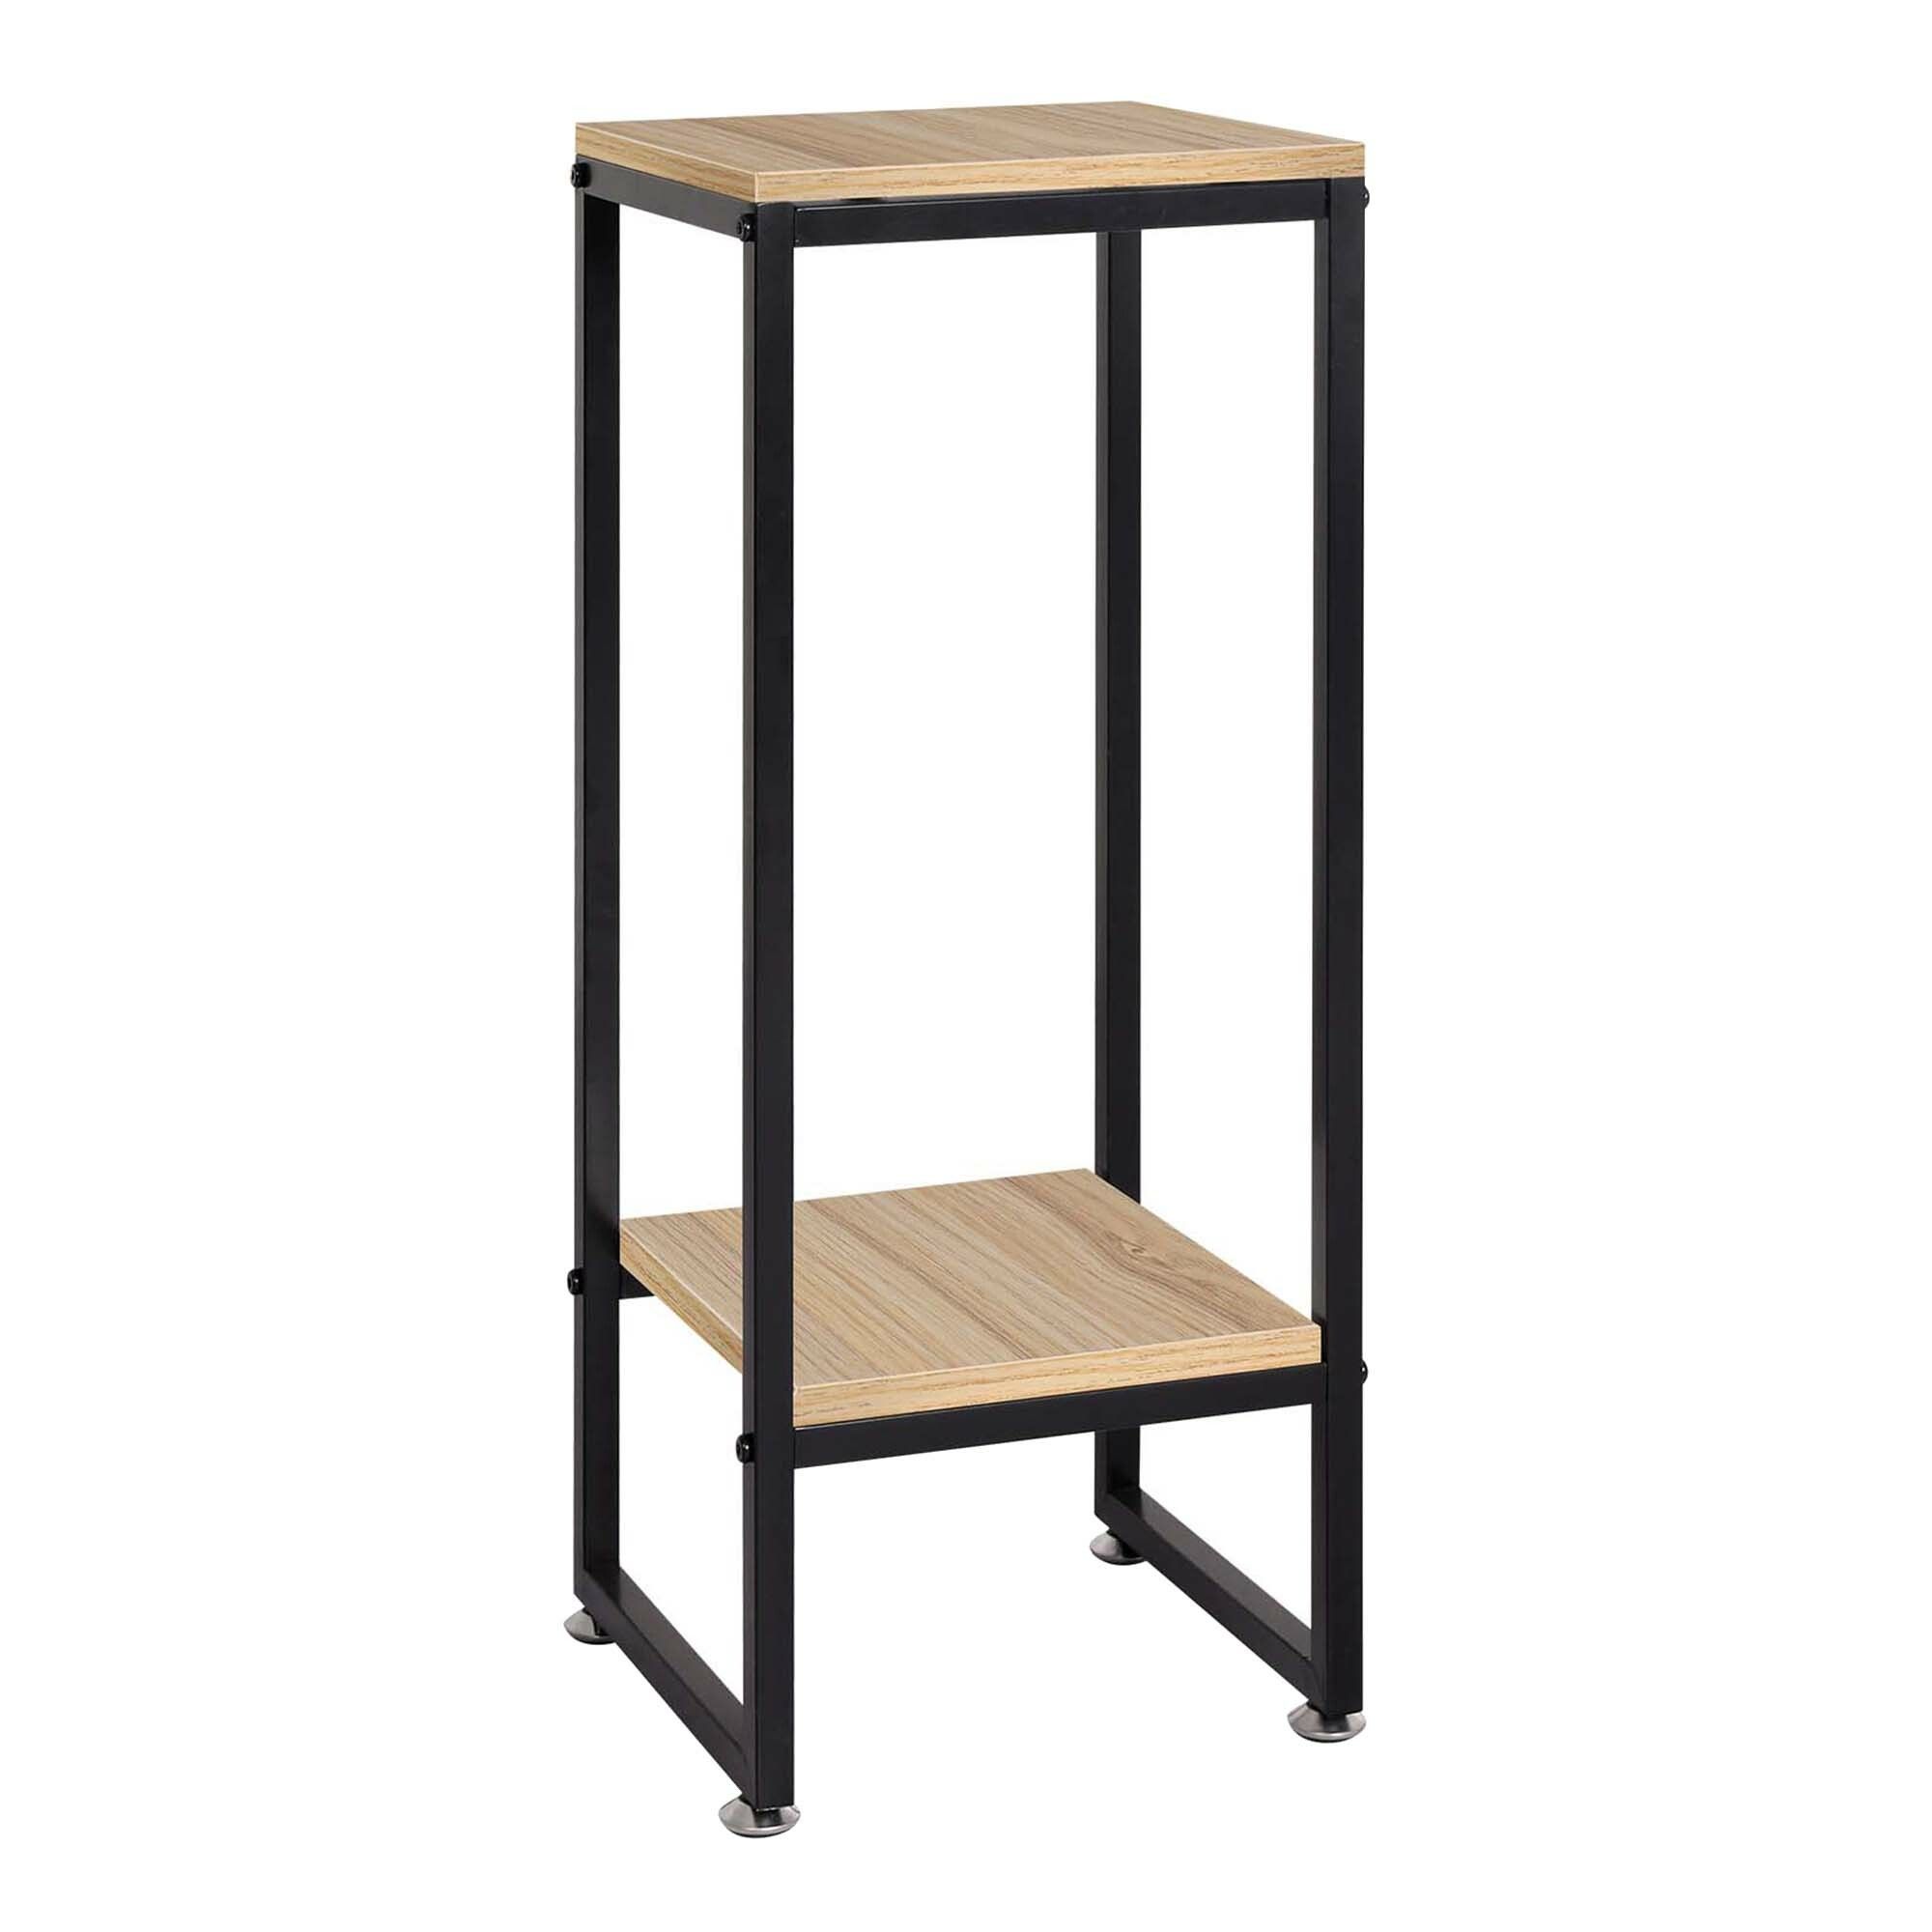 Oakleigh Home Lucille 2 Tier Plant Stand | Temple & Webster For Two Tier Plant Stands (View 8 of 15)